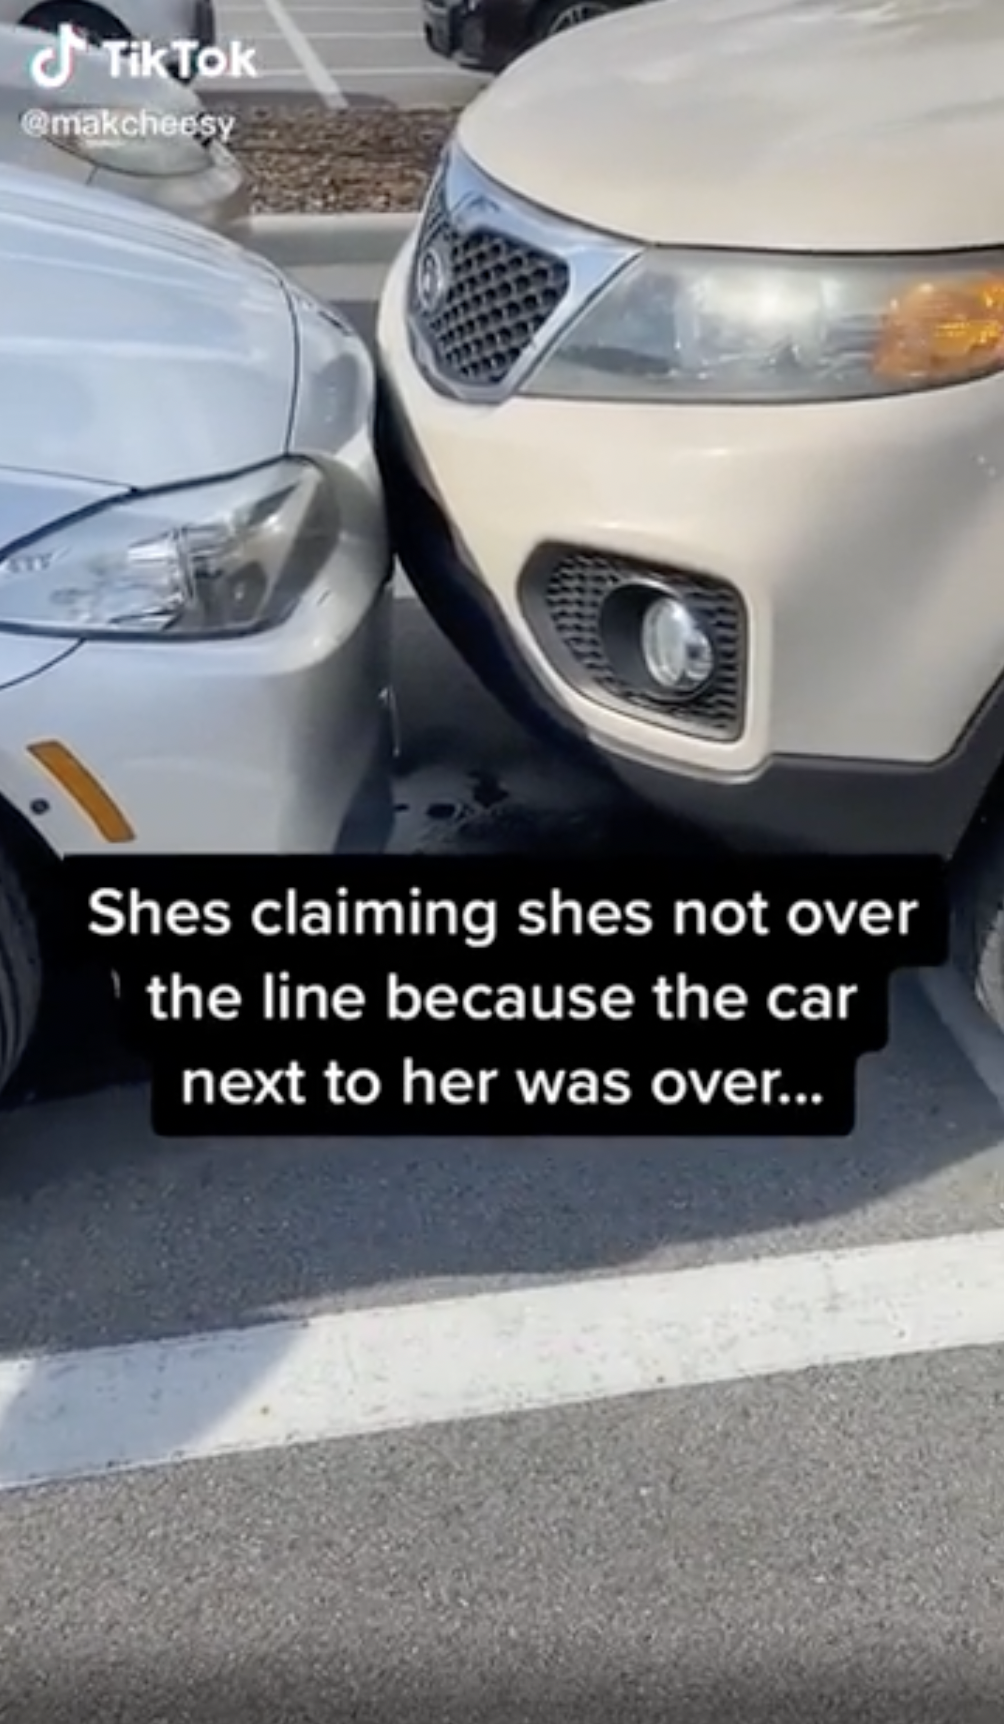 bumper - Tik Tok H Shes claiming shes not over the line because the car next to her was over...